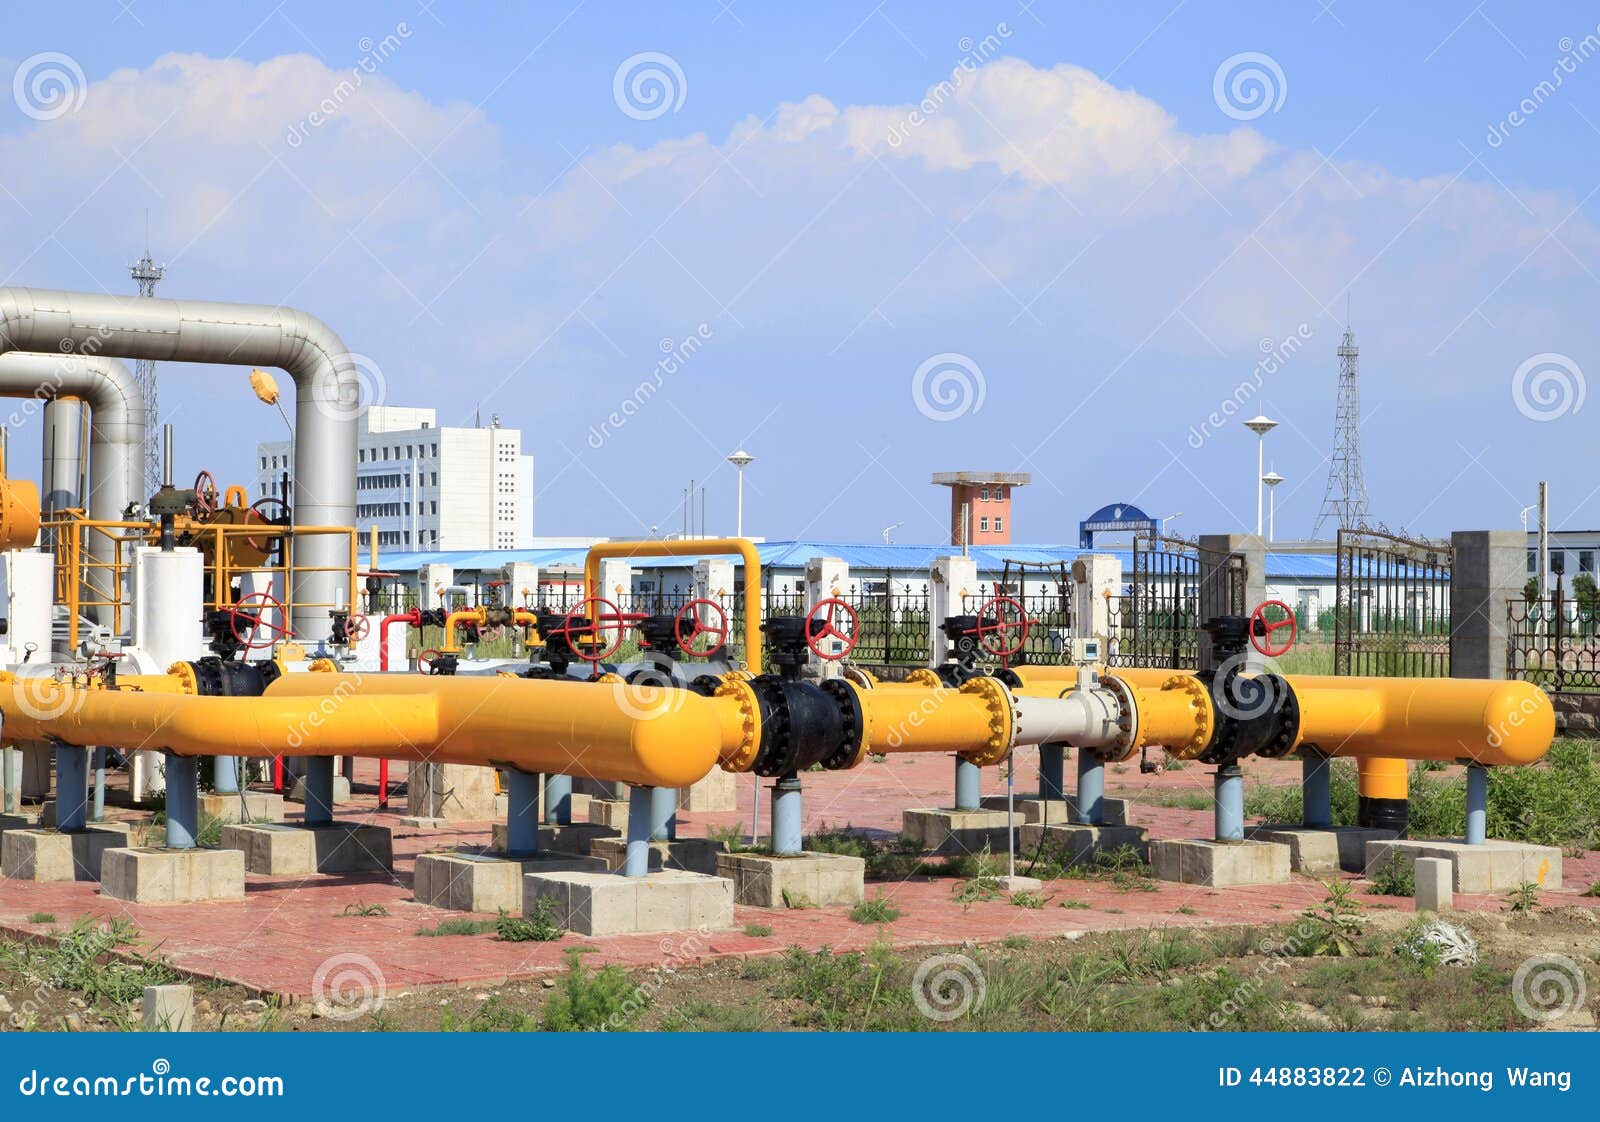 Oilfield Perspective Stock Photo - Download Image Now - iStock